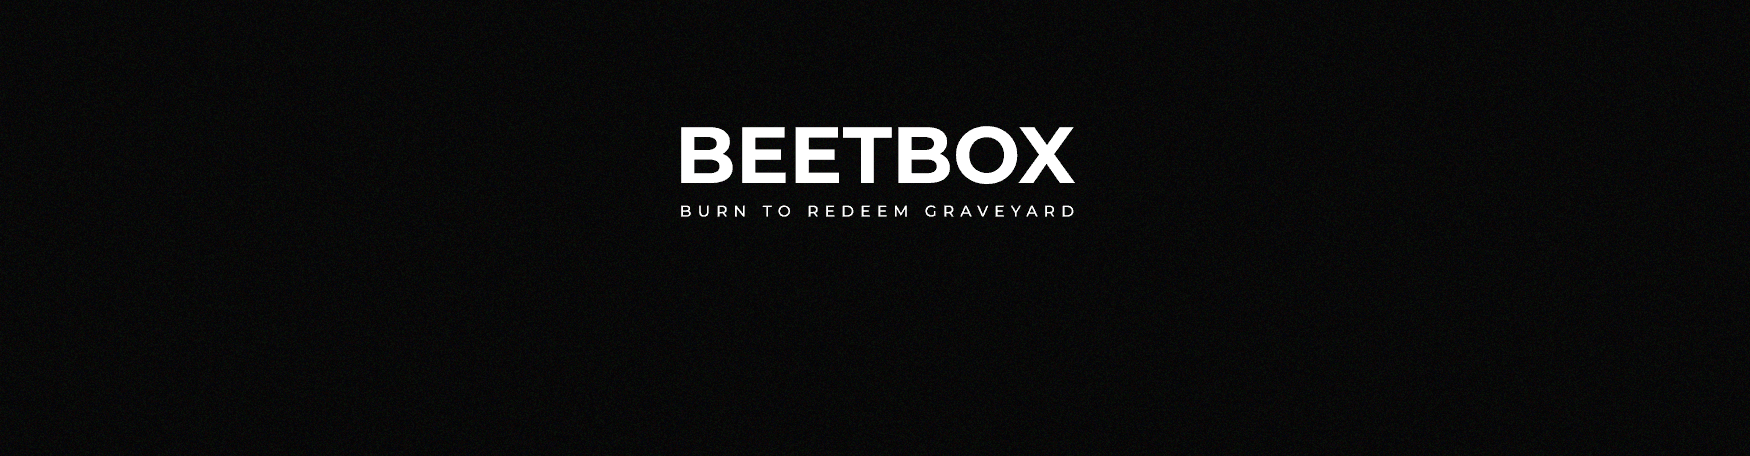 BeetBox banner